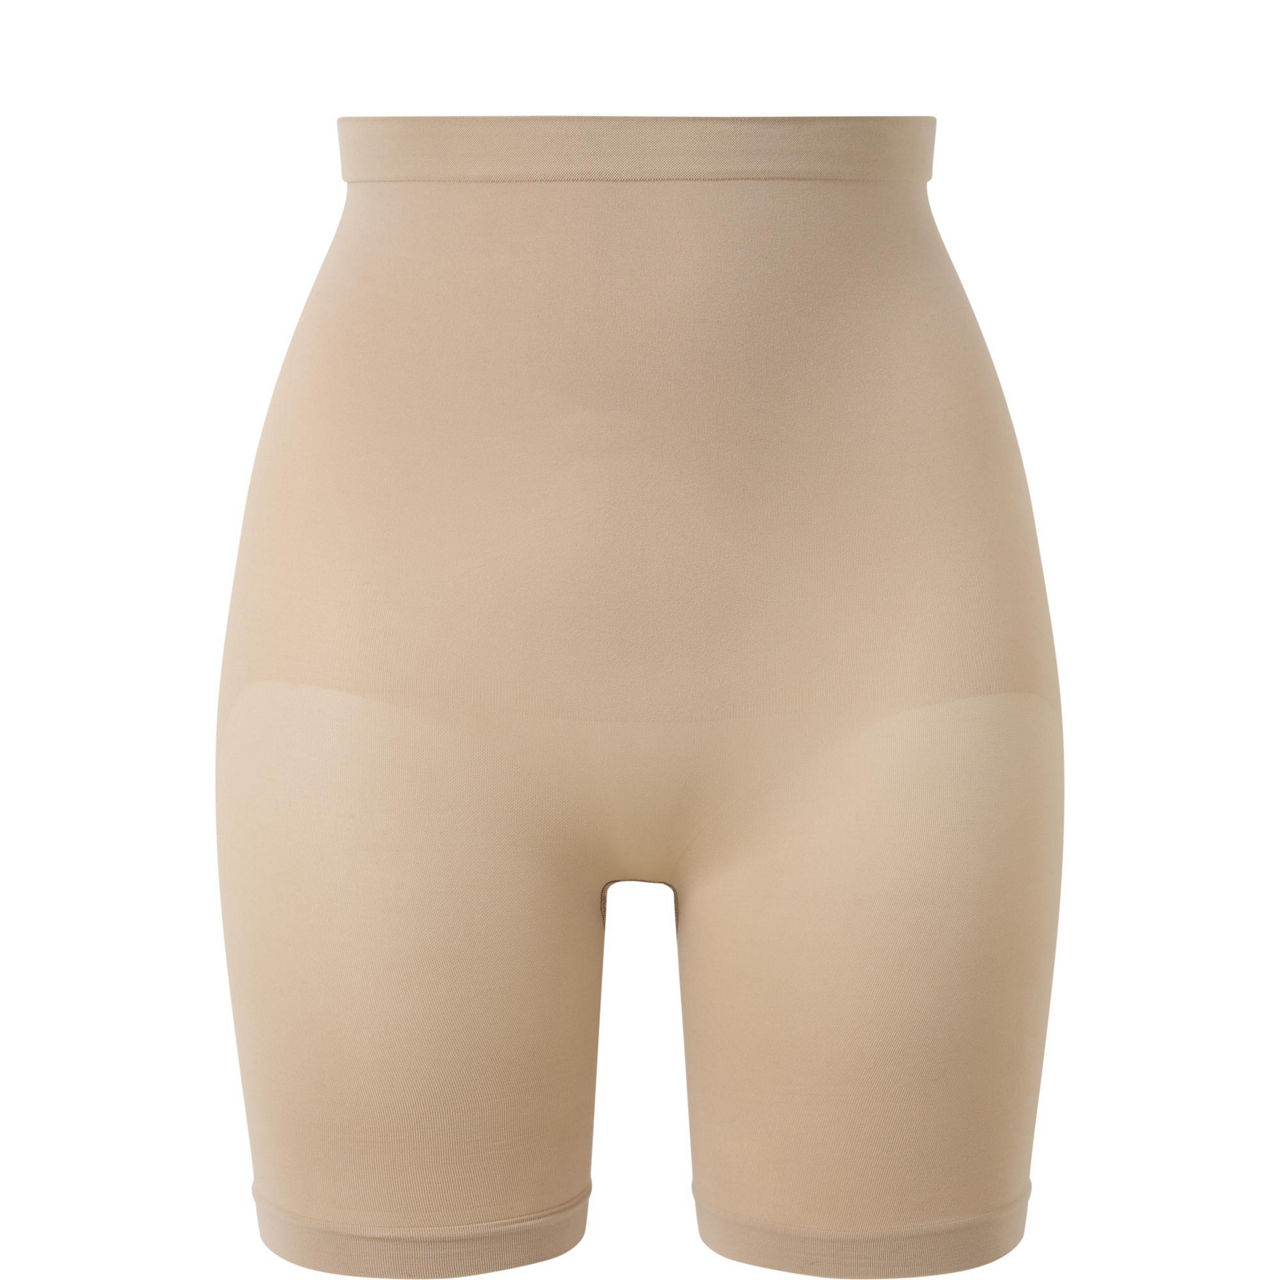 SPANX- Undie-Tectable Thong 🆕 Size: XL - Colour: Umber ash